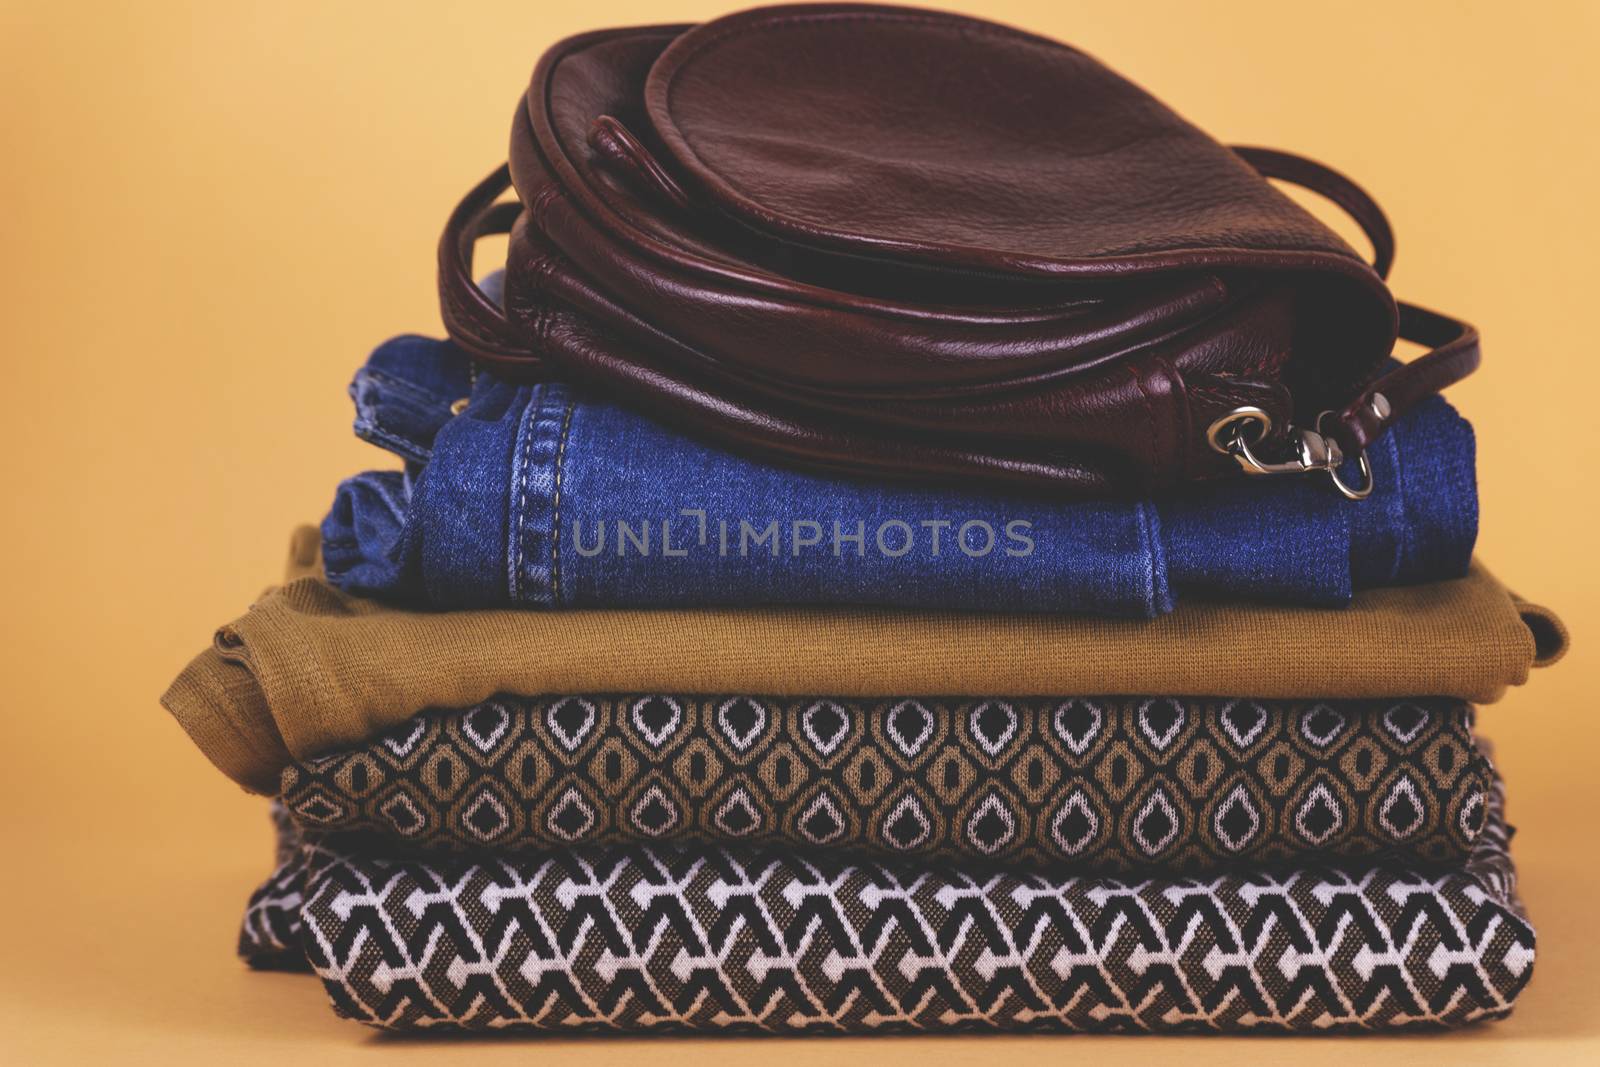 Women's shoes, clothing and accessories on a colored background